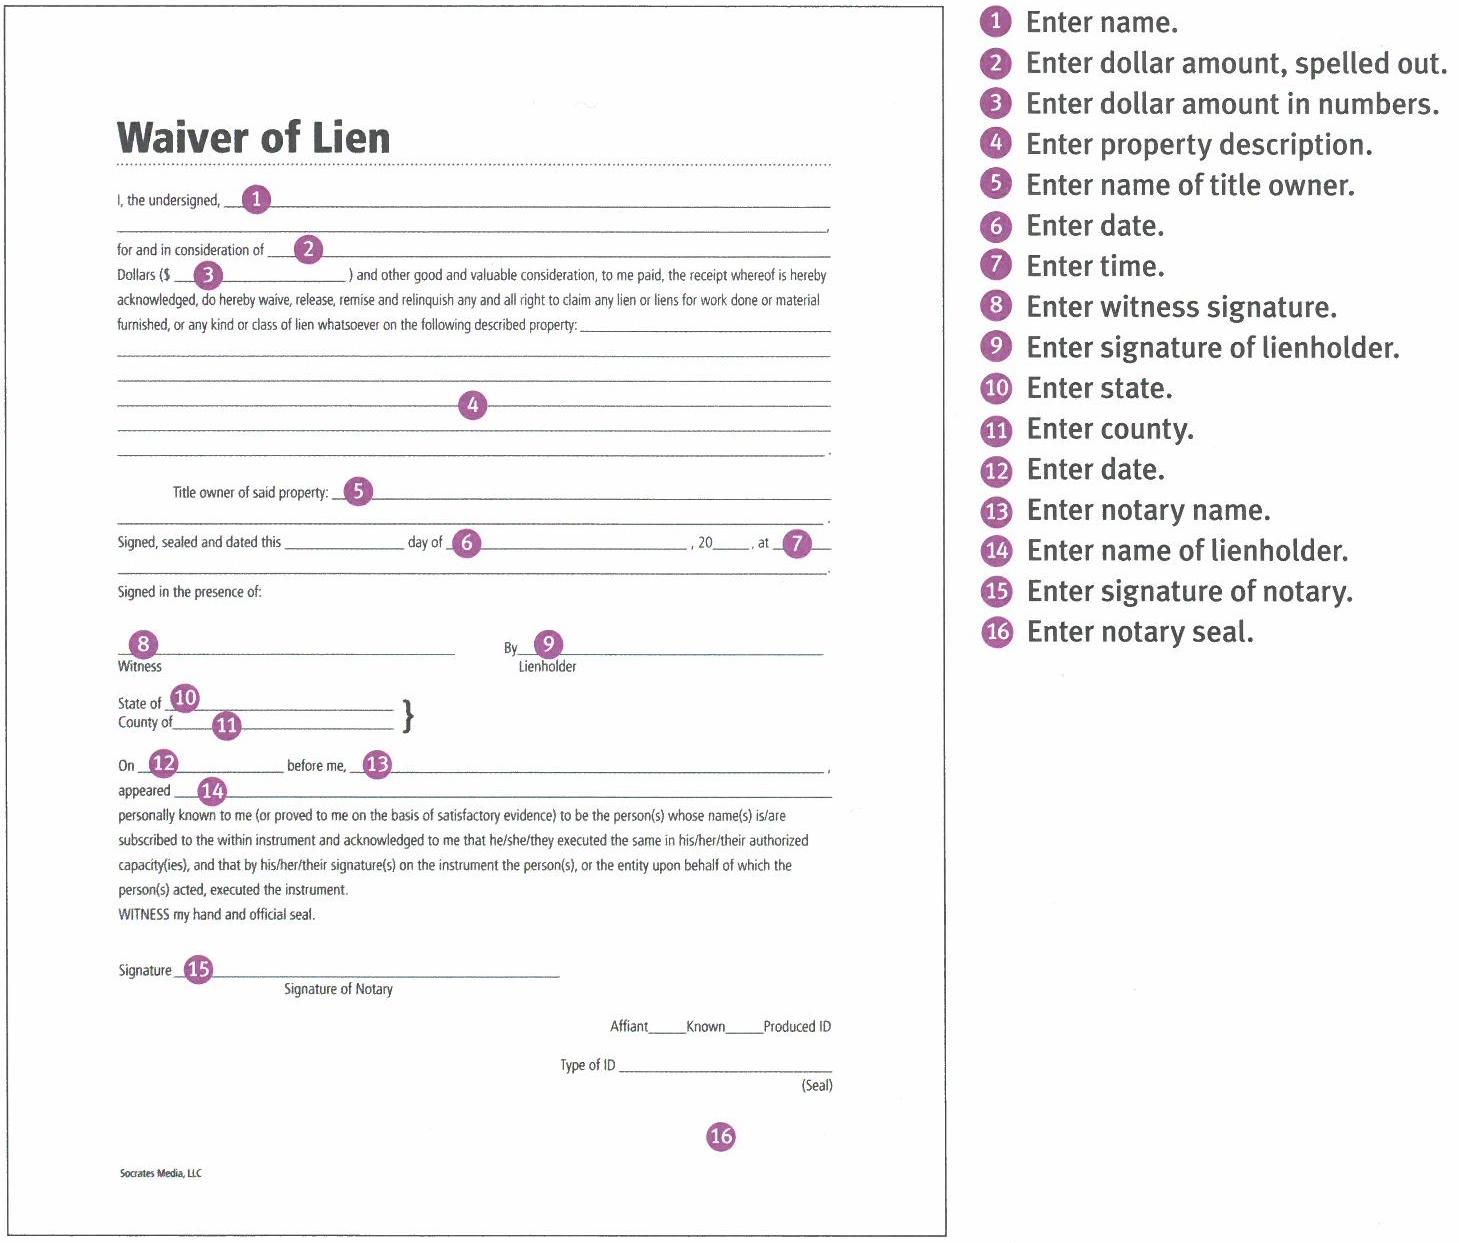 Lien Waiver Step-by-Step Instructions